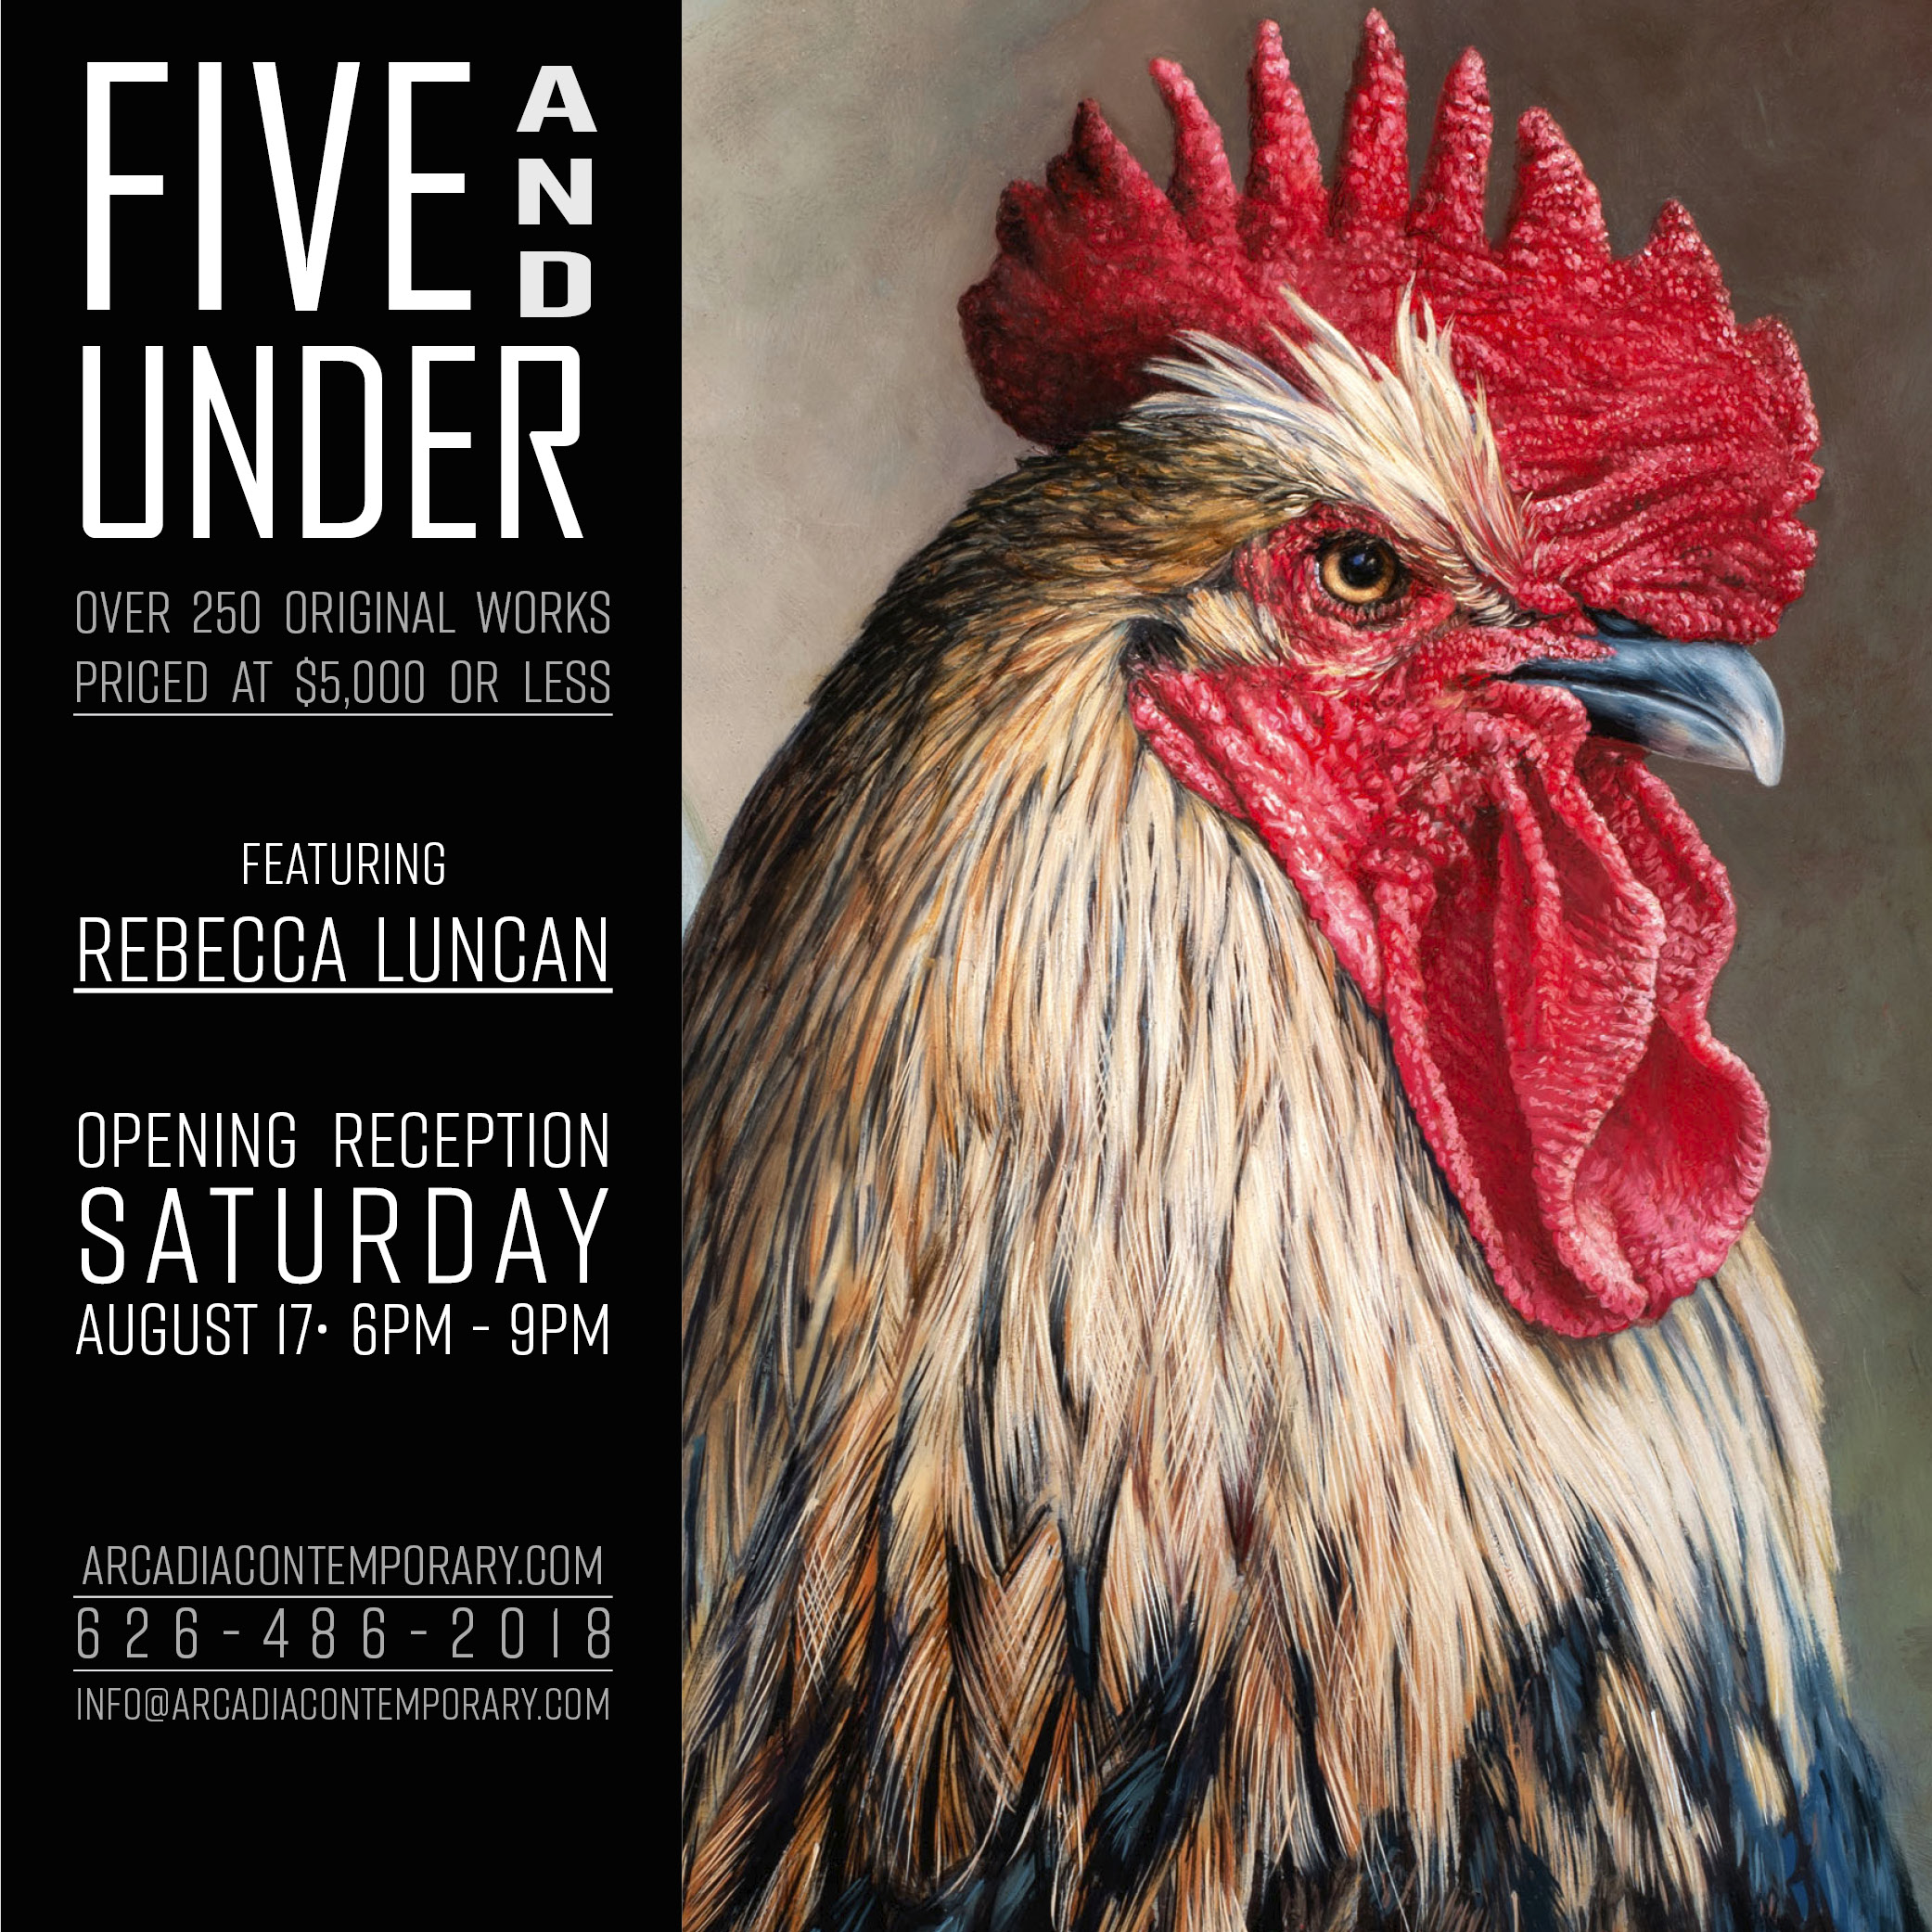 Five and Under 2019 Exhibit Rooster Portrait Painting by Rebecca Luncan